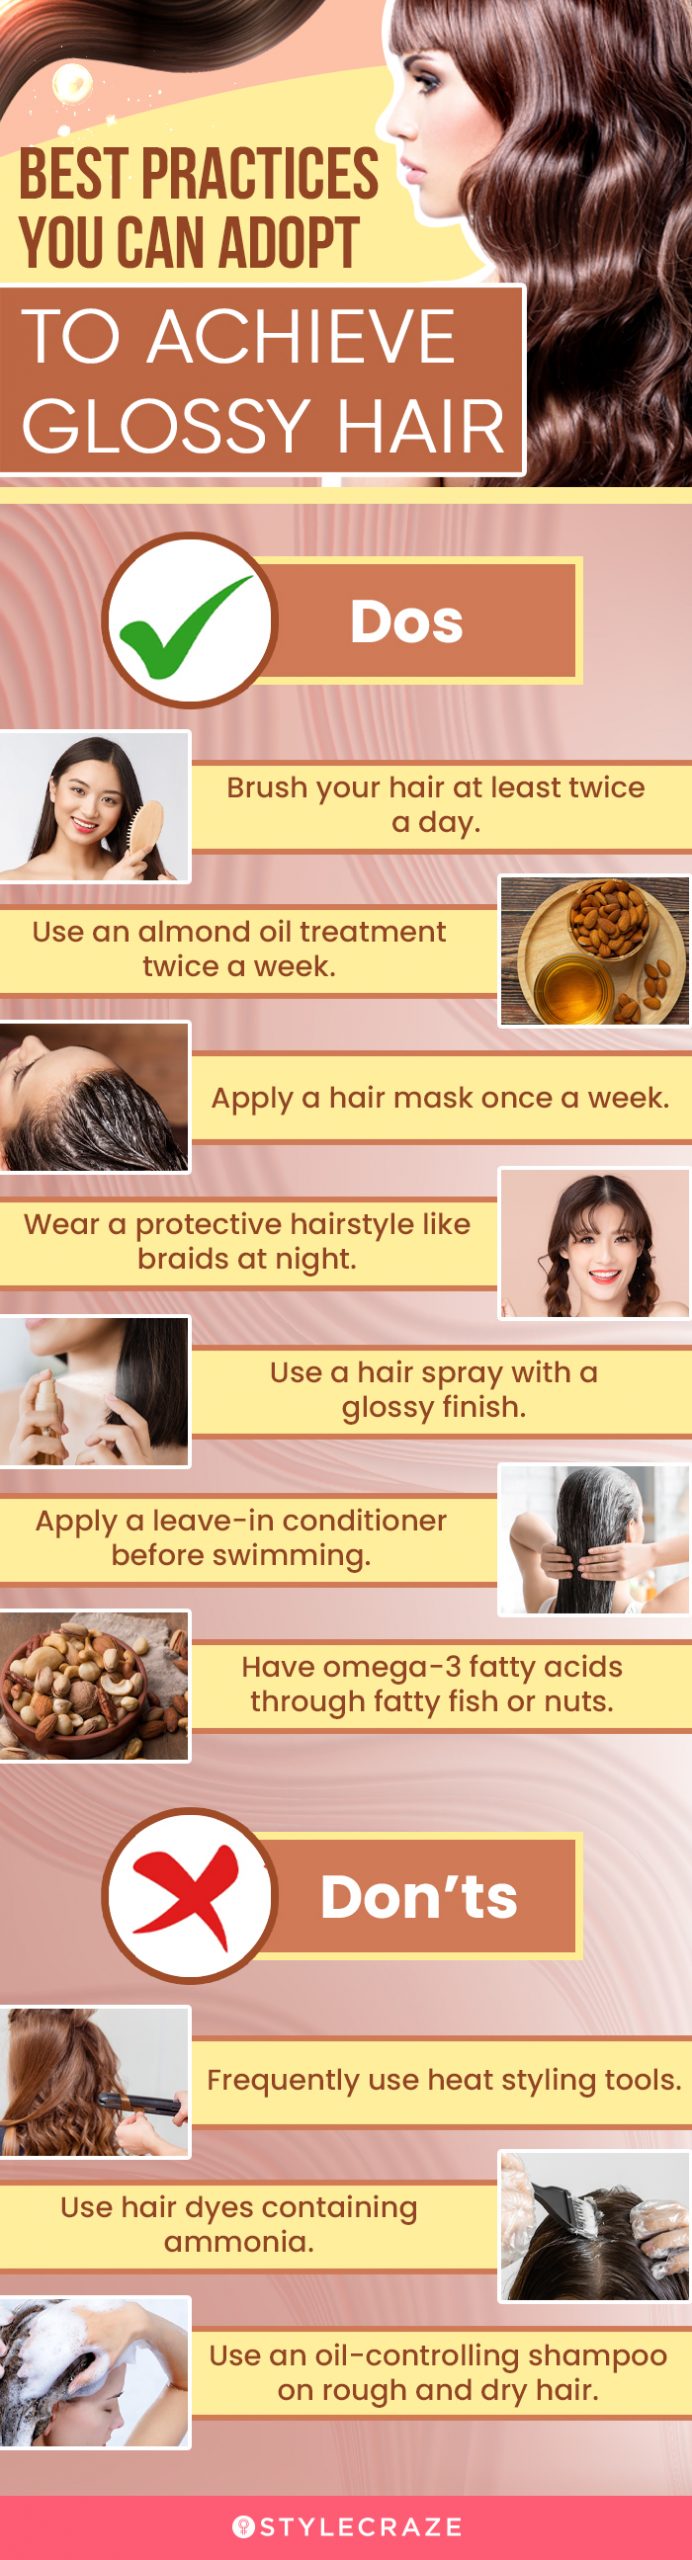 best practices you can adopt to achieve glossy hair (infographic)